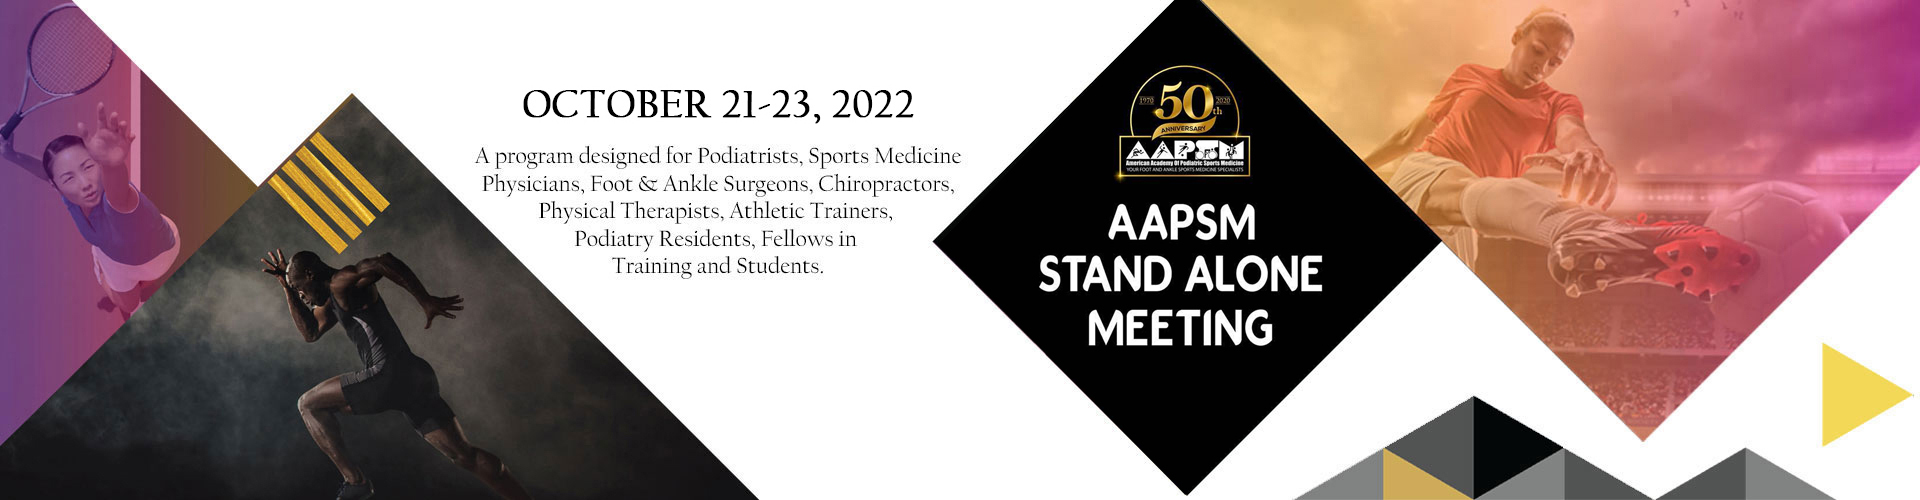 2022 AAPSM Stand Alone Meeting